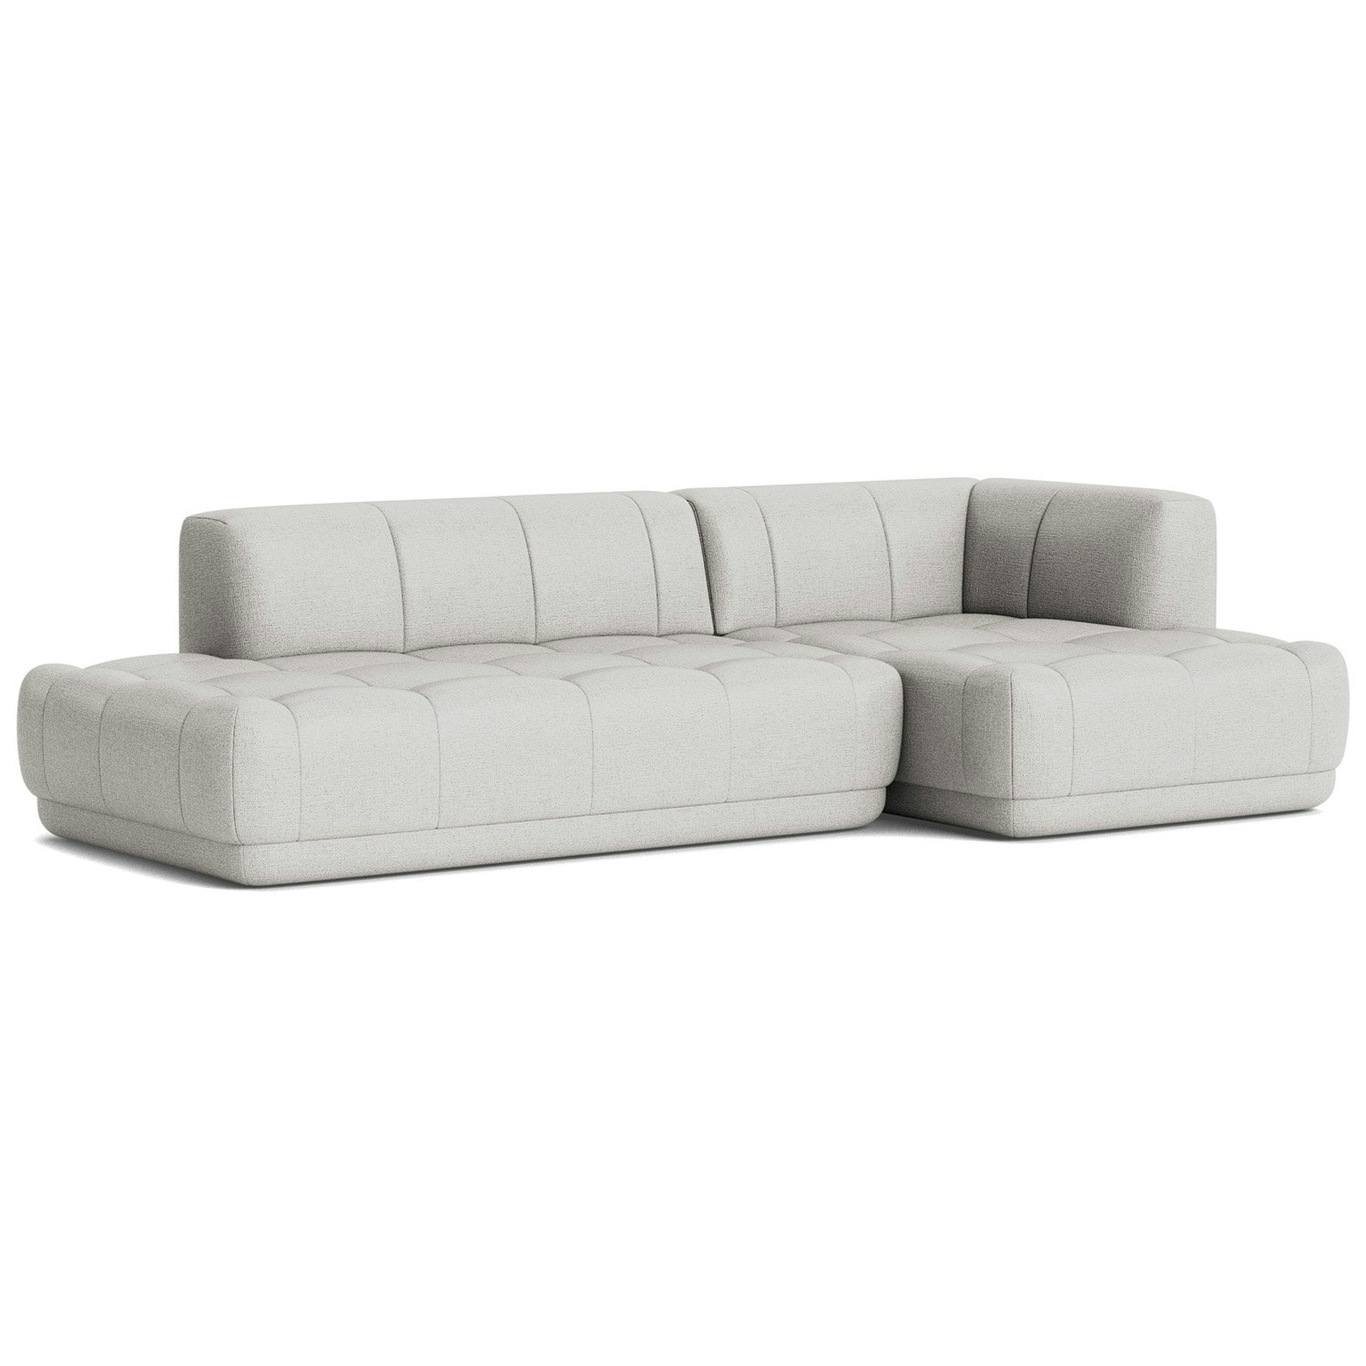 Quilton 3.5-Seater Sofa Configuration 21 Right, Roden 04